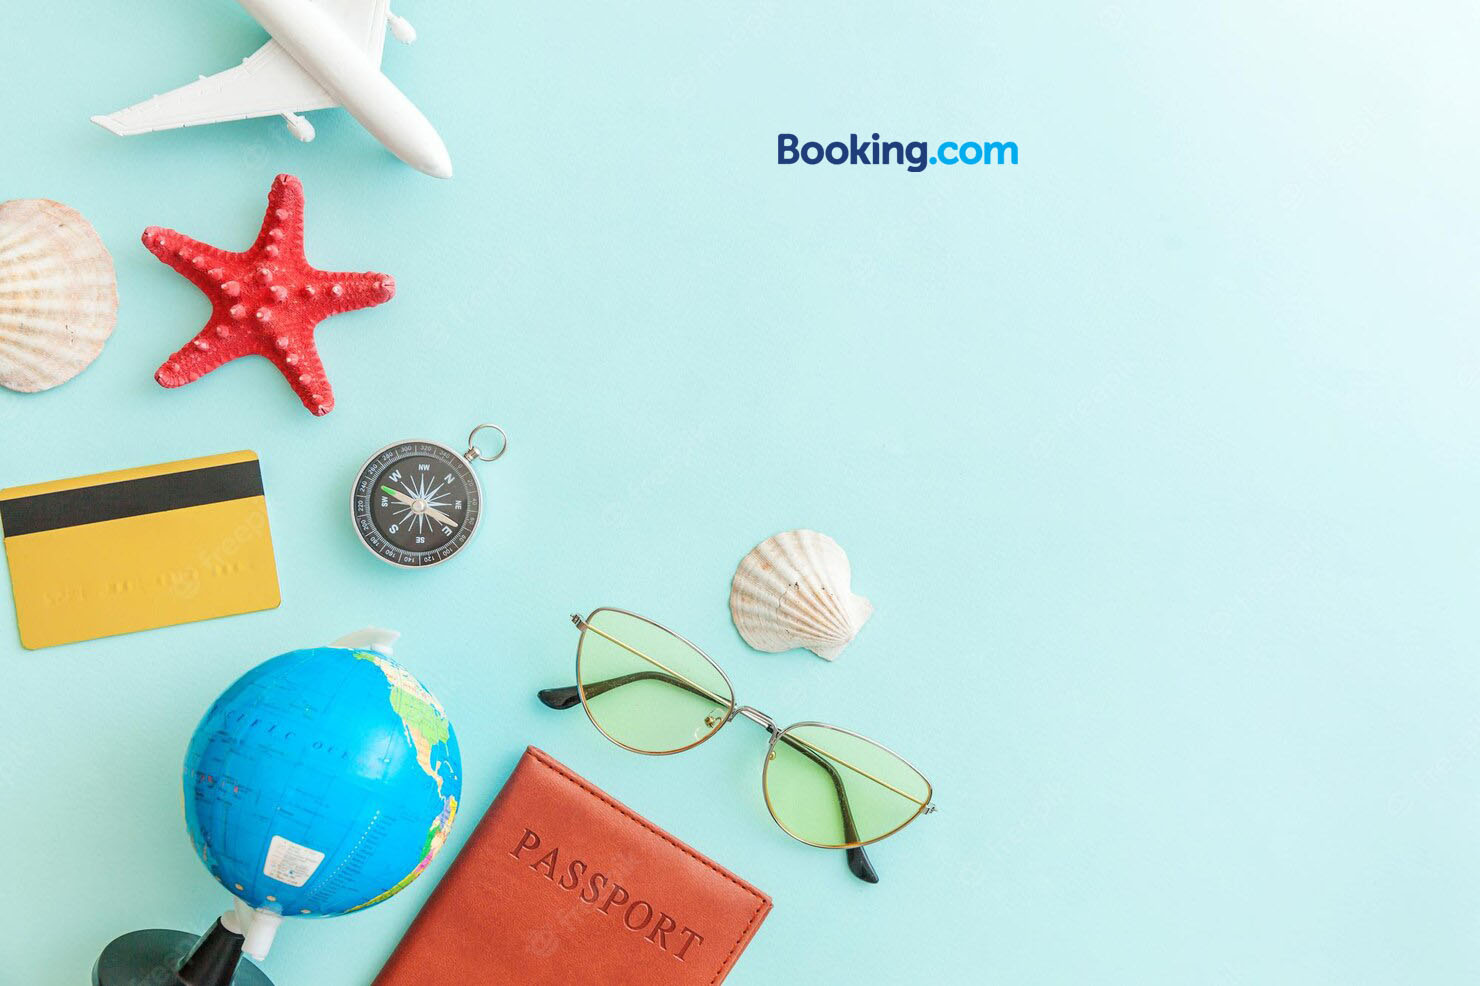 Booking.com Holidays Planning Agency.